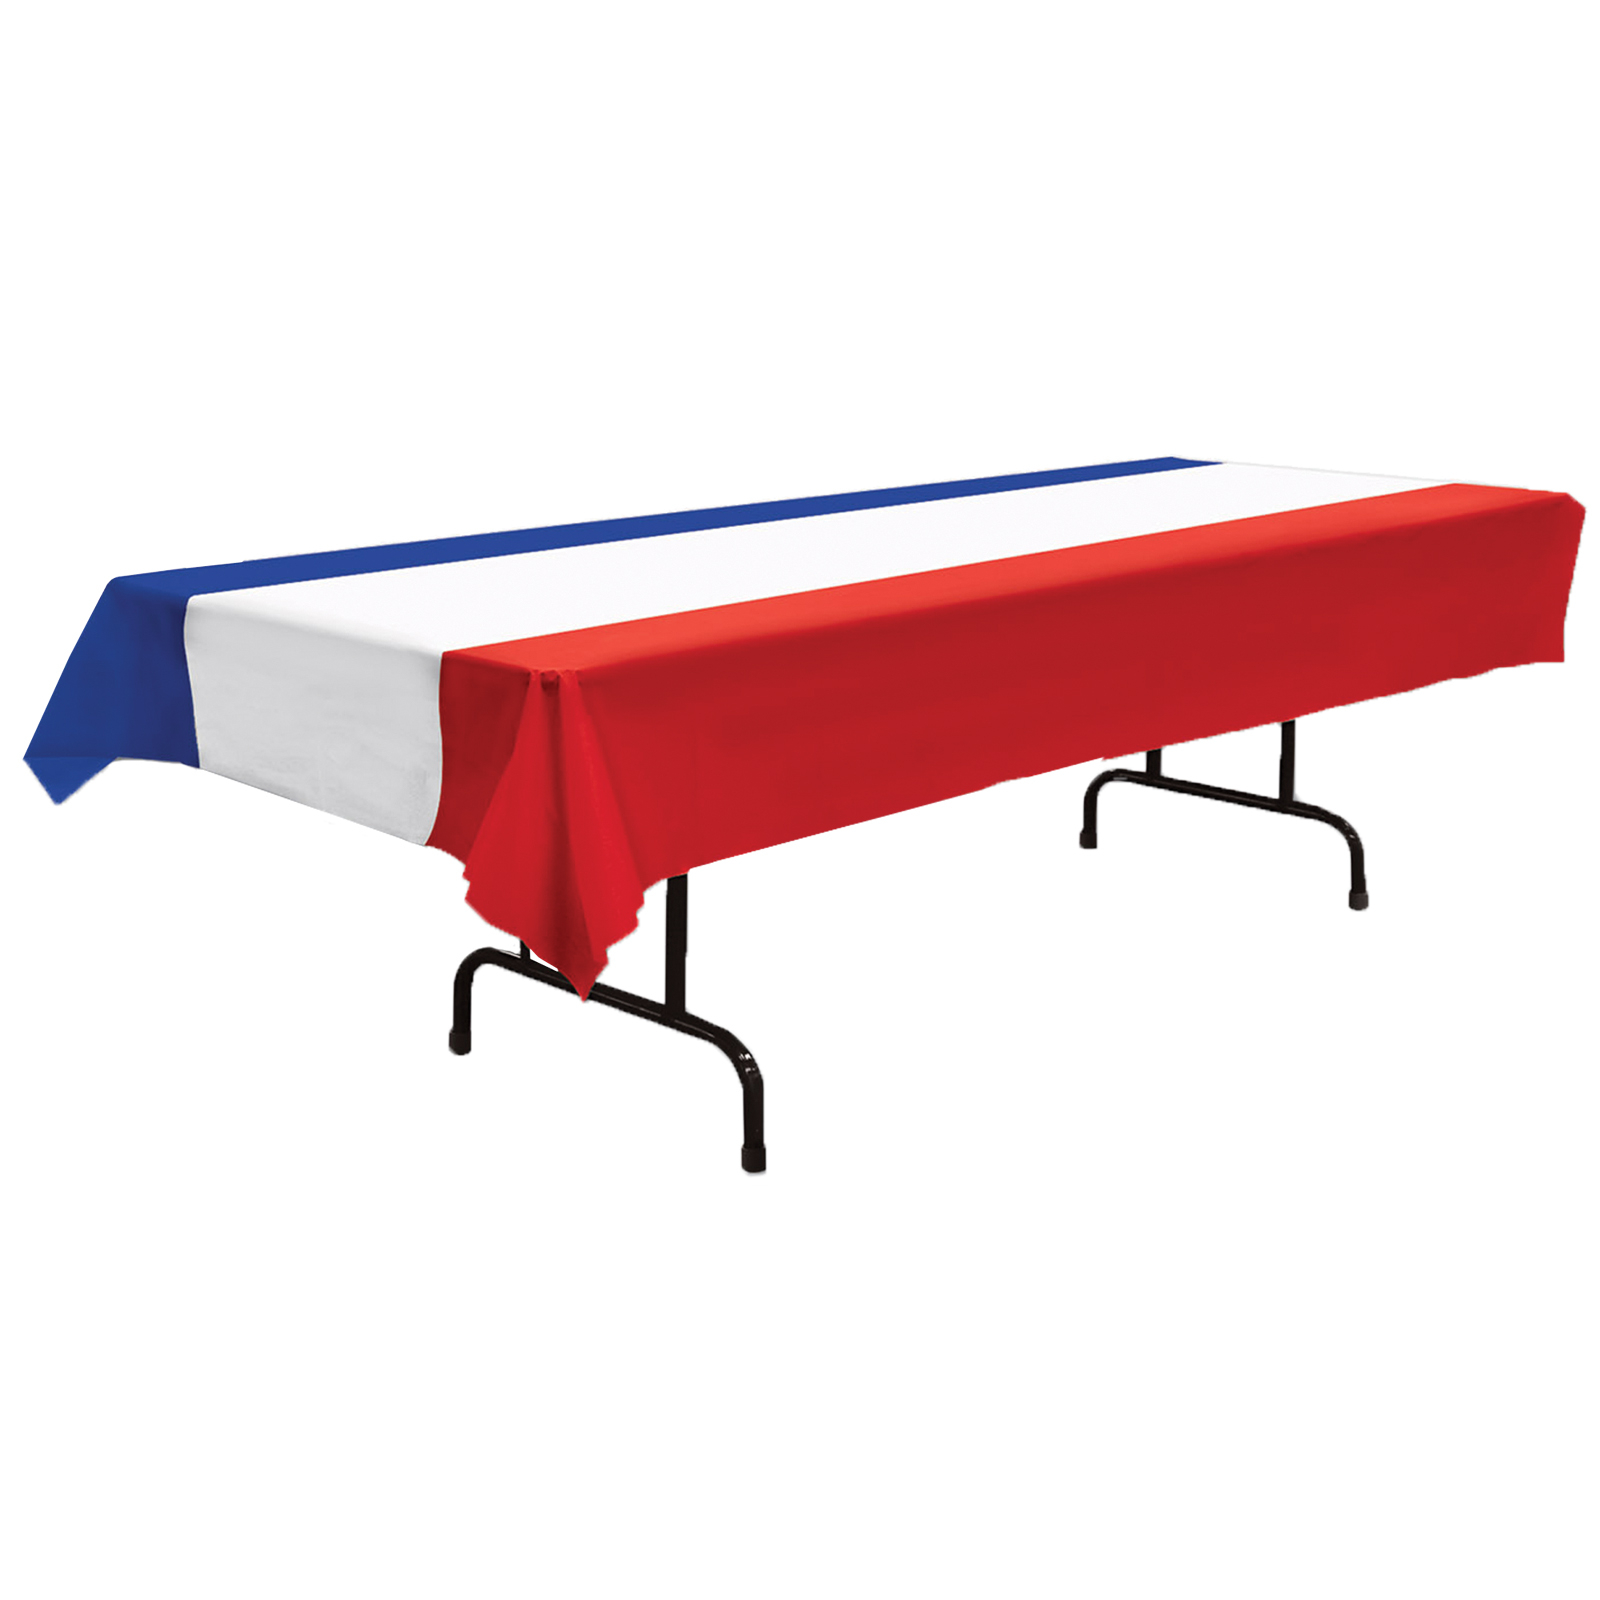 9' Patriotic Red, White and Blue Table Cover PEVA